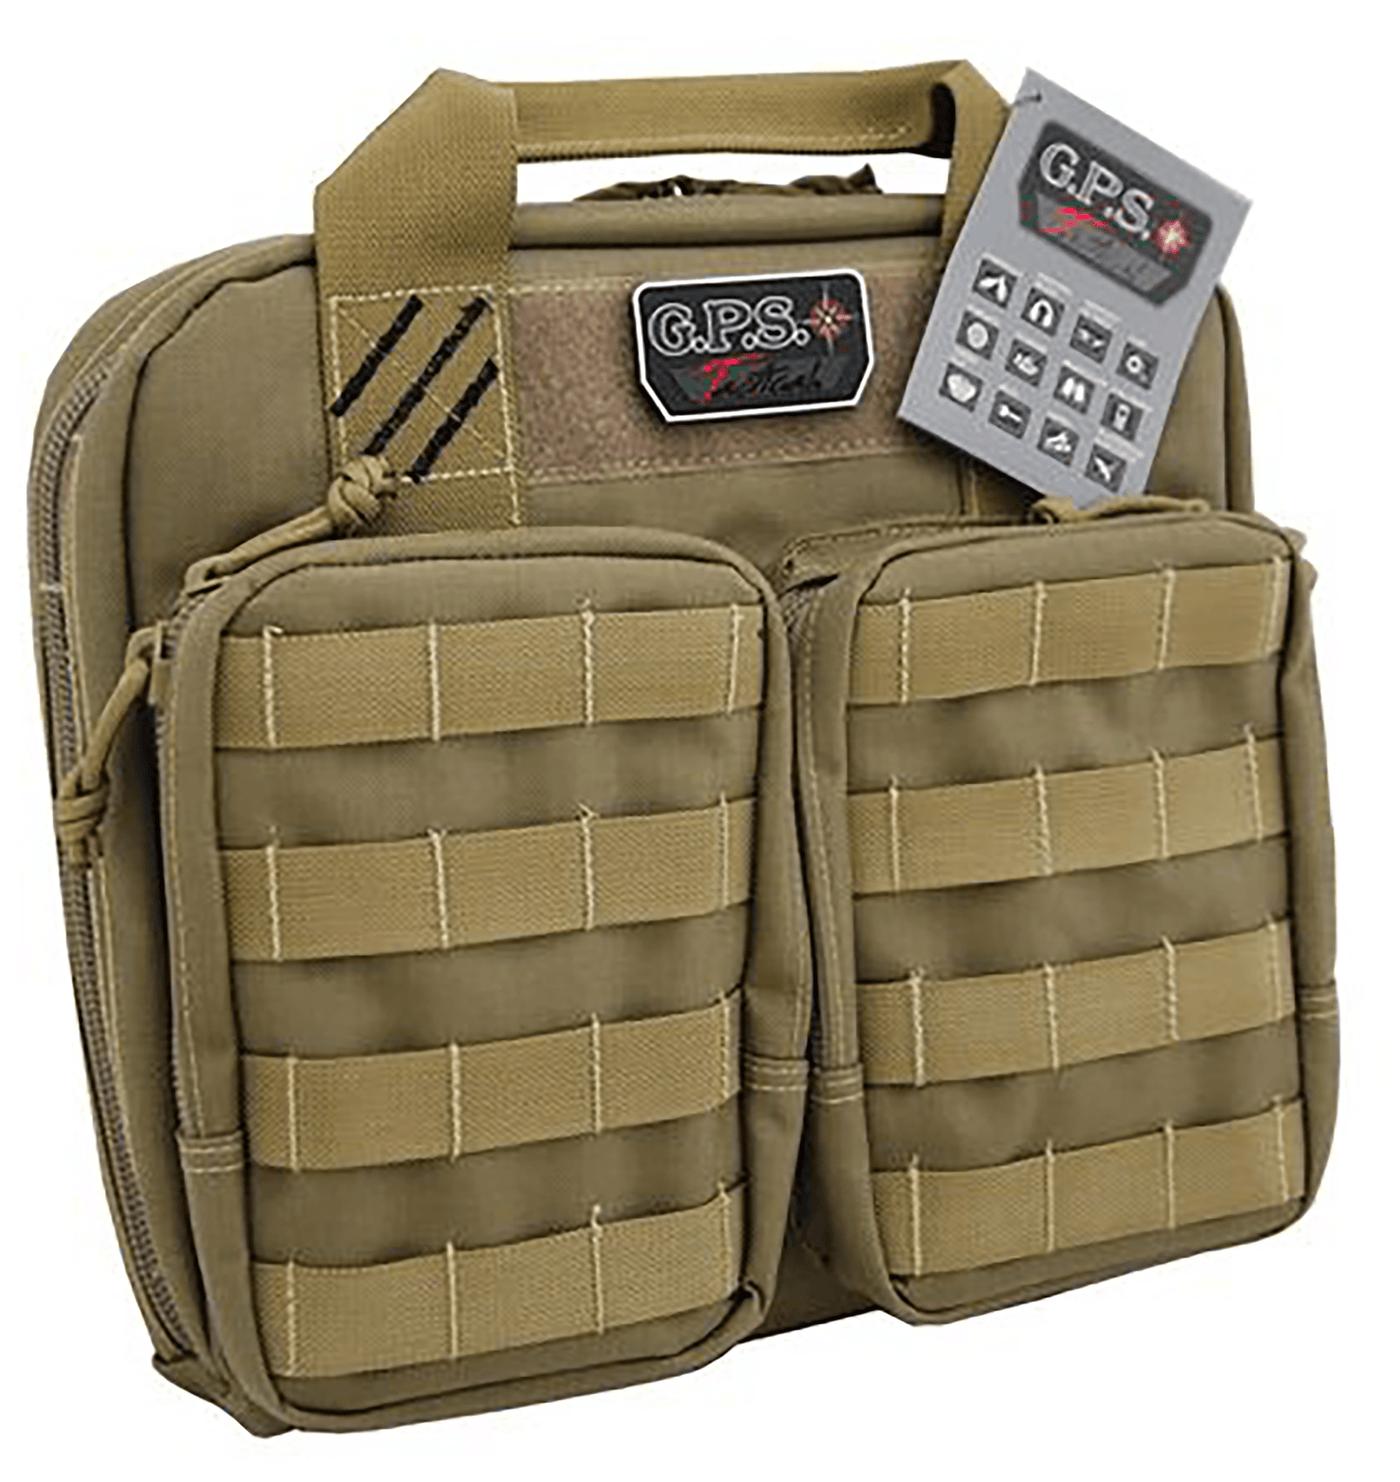 G*Outdoors G*outdoors Tactical, Gps T1411pct  Tactical Double Pistol Case -tan Firearm Accessories